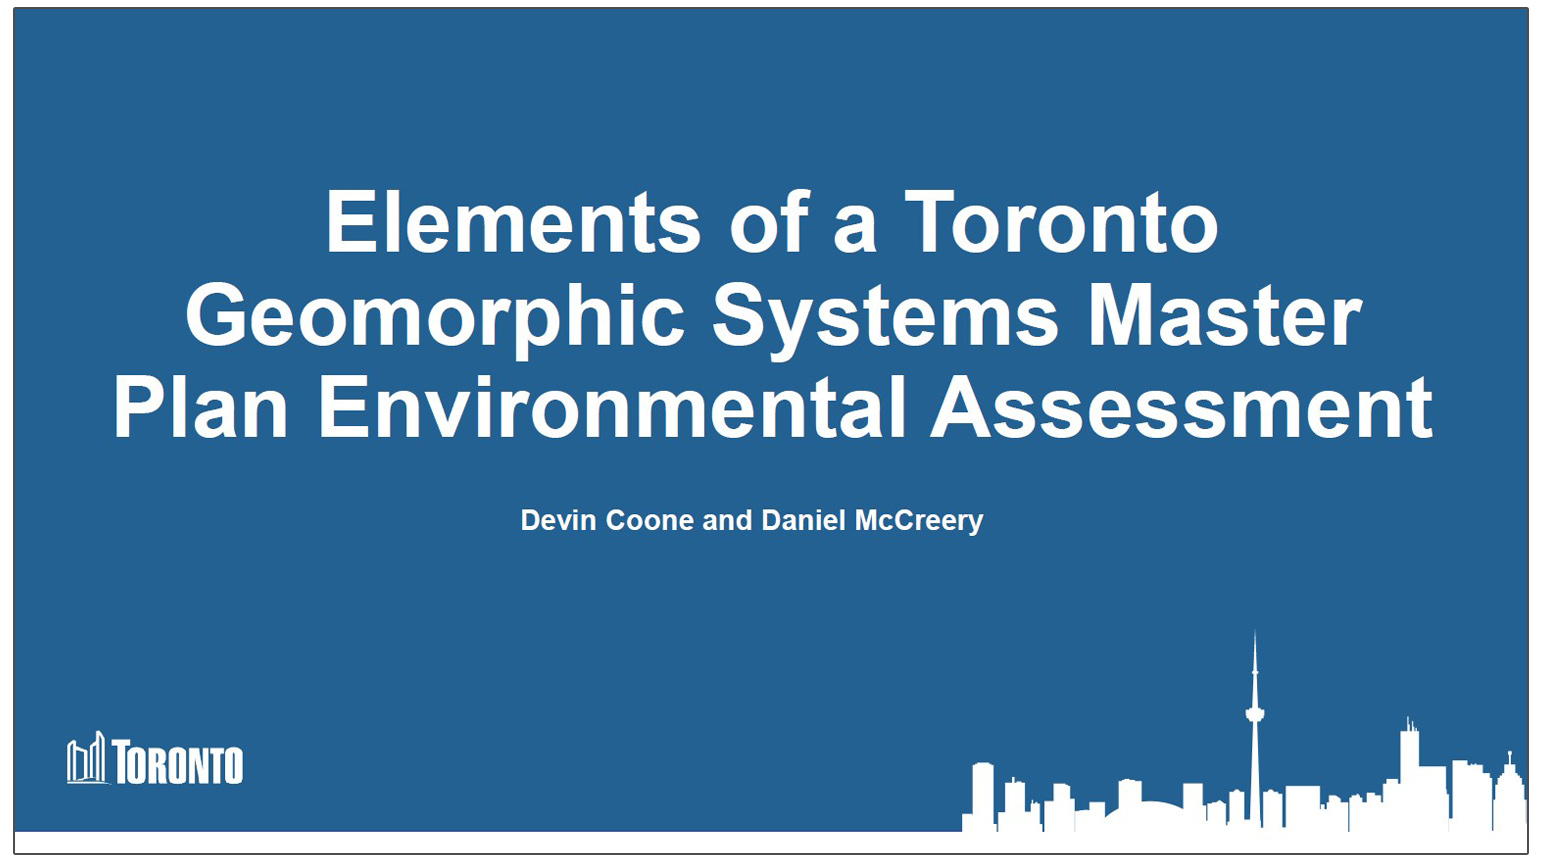 Key Elements of an Urban Geomorphic Systems Master Plan Environmental Assessment - presentation by Daniel McCreery and Devin Coone